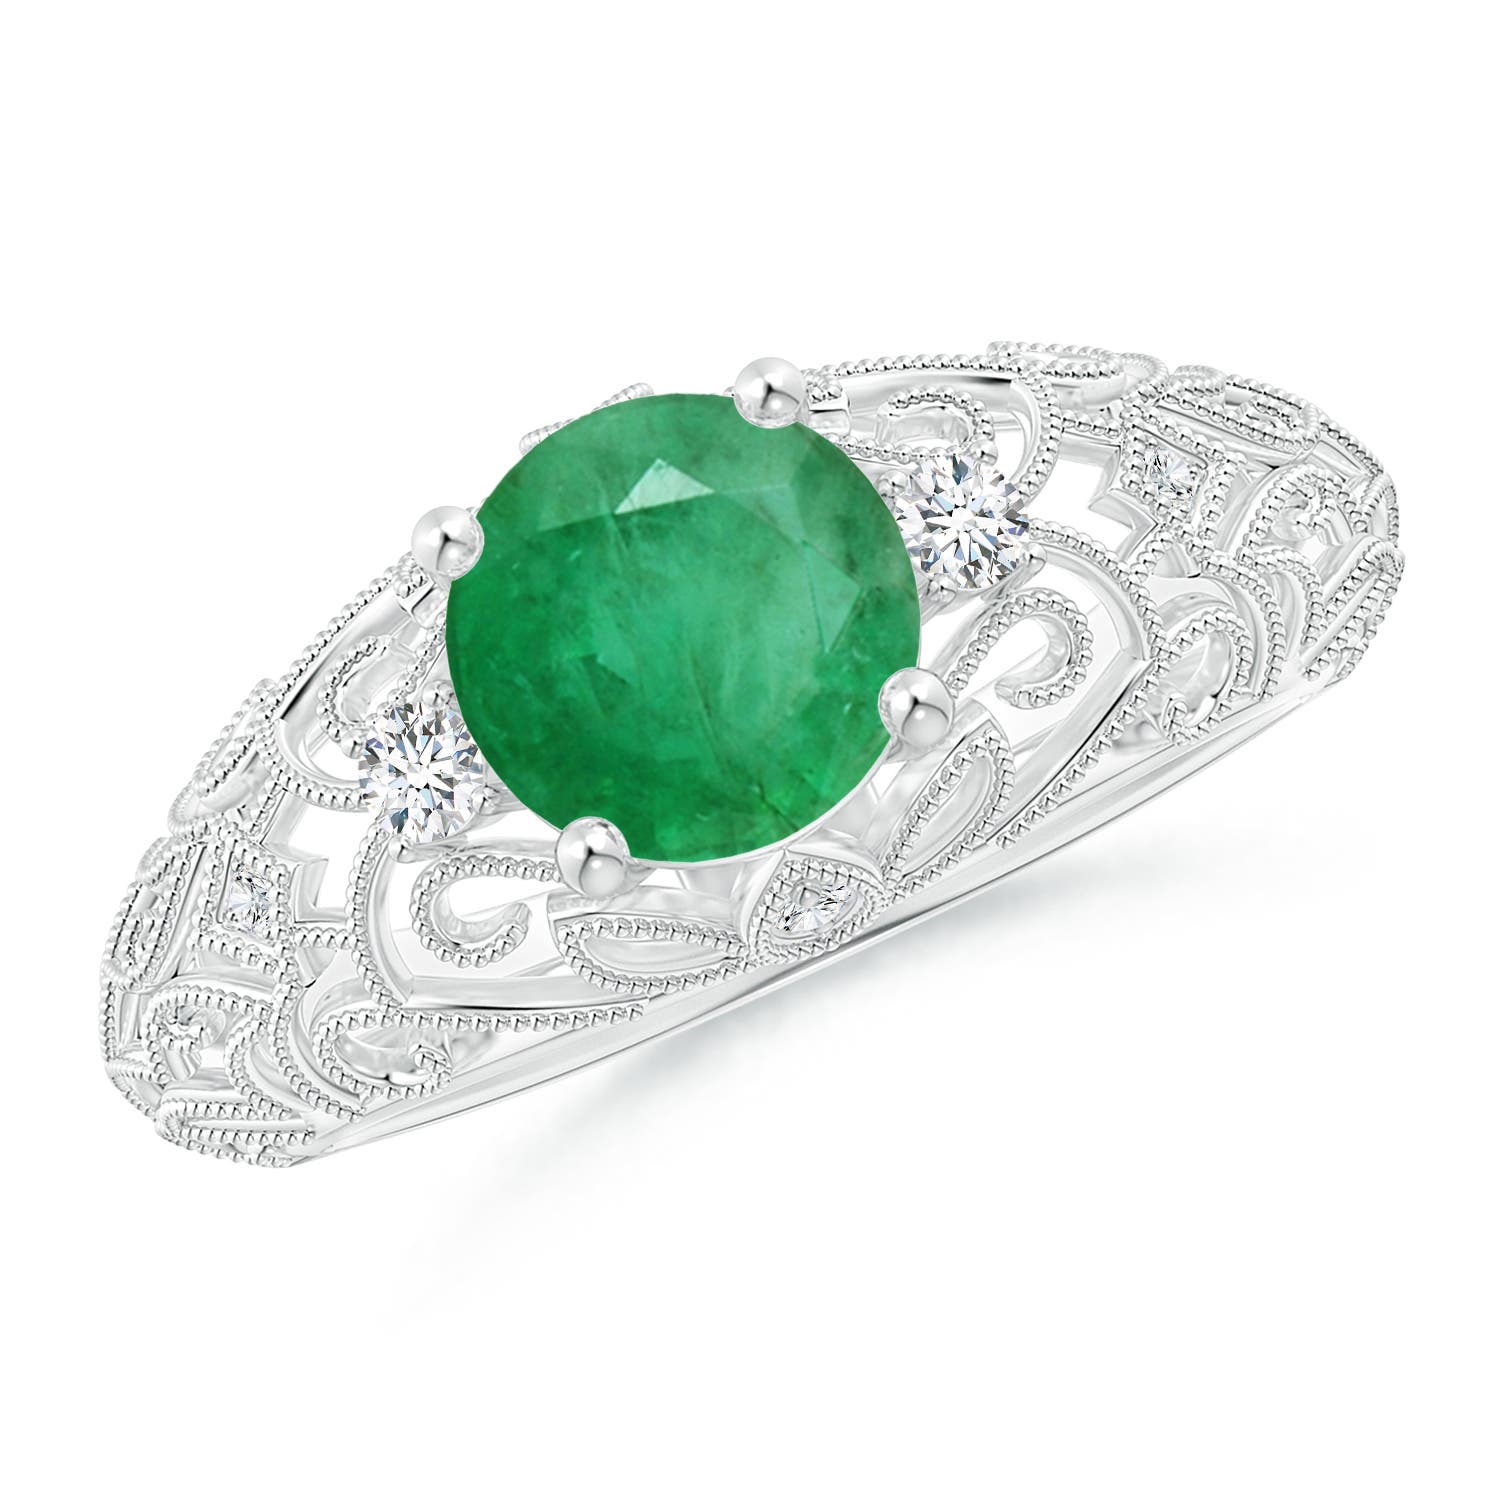 A - Emerald / 1.3 CT / 14 KT White Gold